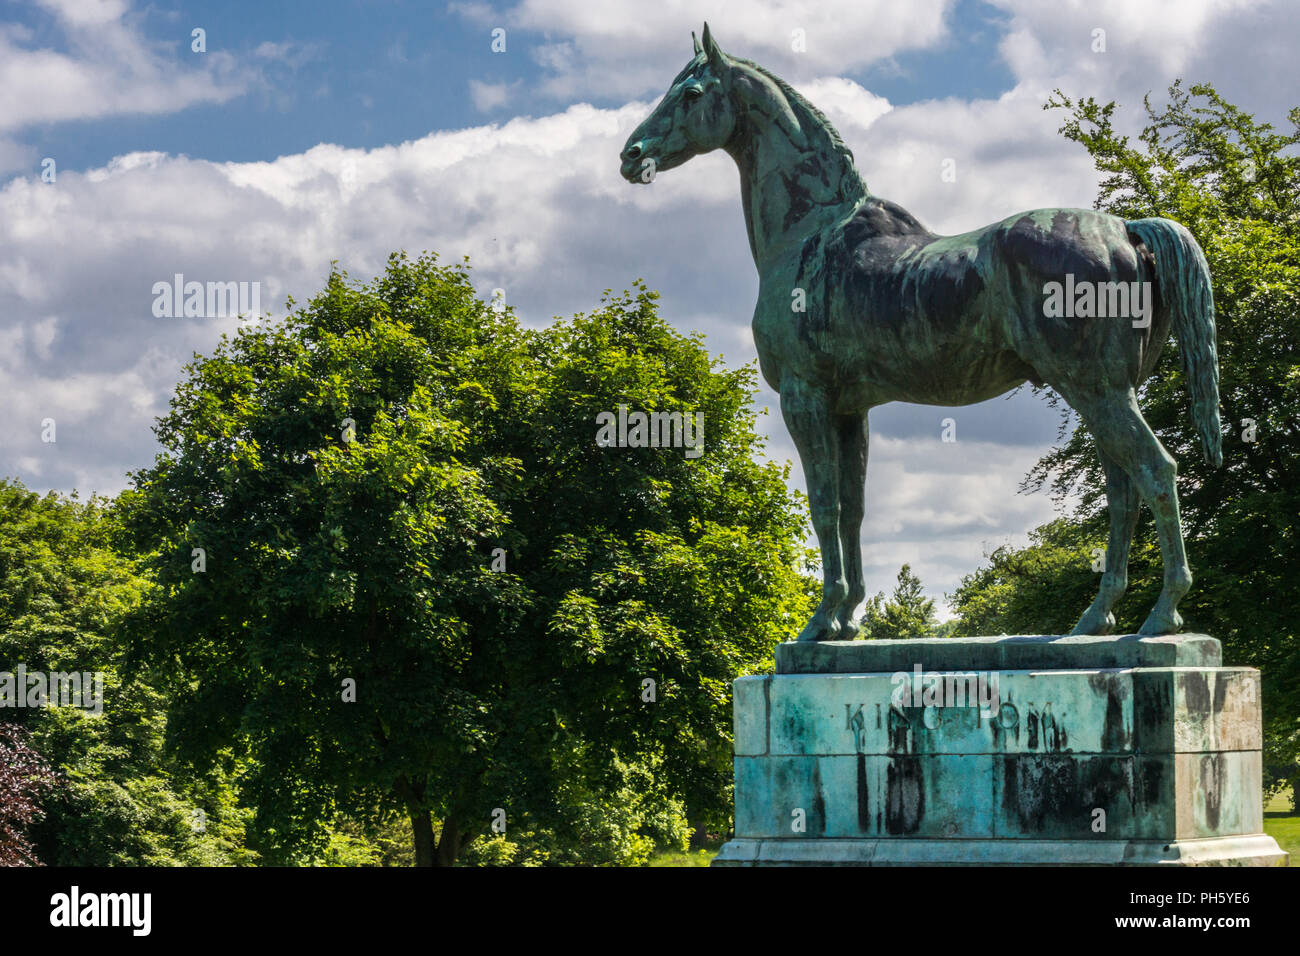 Edinburgh, Scotland, UK - June 14, 2012:Closeup of Horse statue of King Tom looking at Firth of Forth at Dalmeny House. Green trees in back, cloudscap Stock Photo